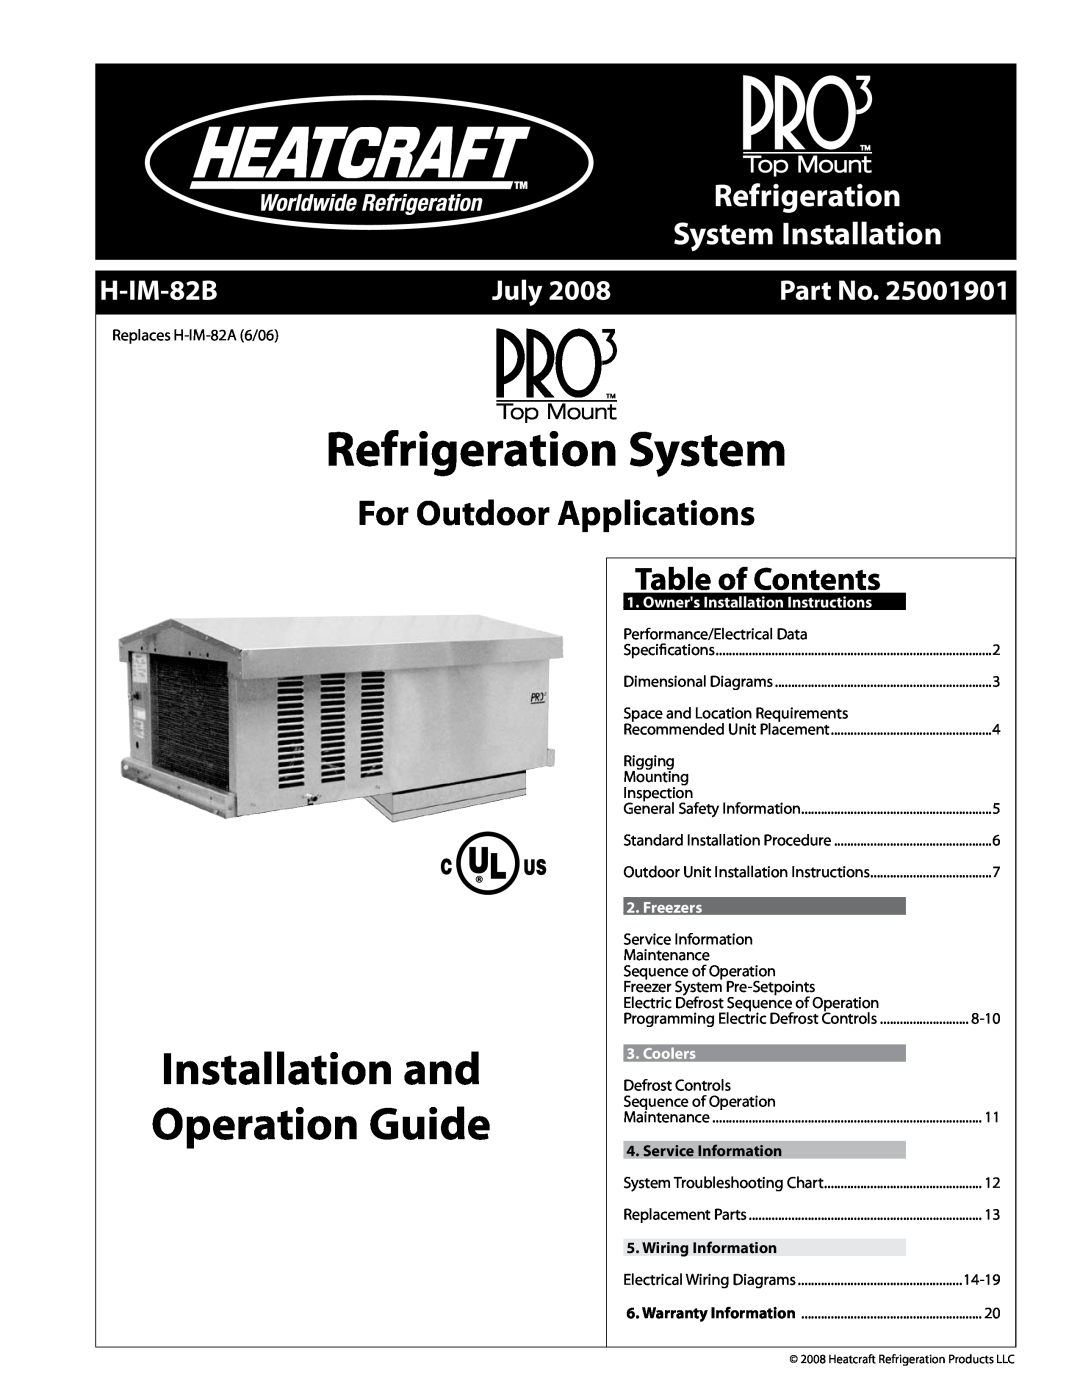 Heatcraft Refrigeration Products H-IM-82B installation and operation guide Table of Contents, Refrigeration System, July 